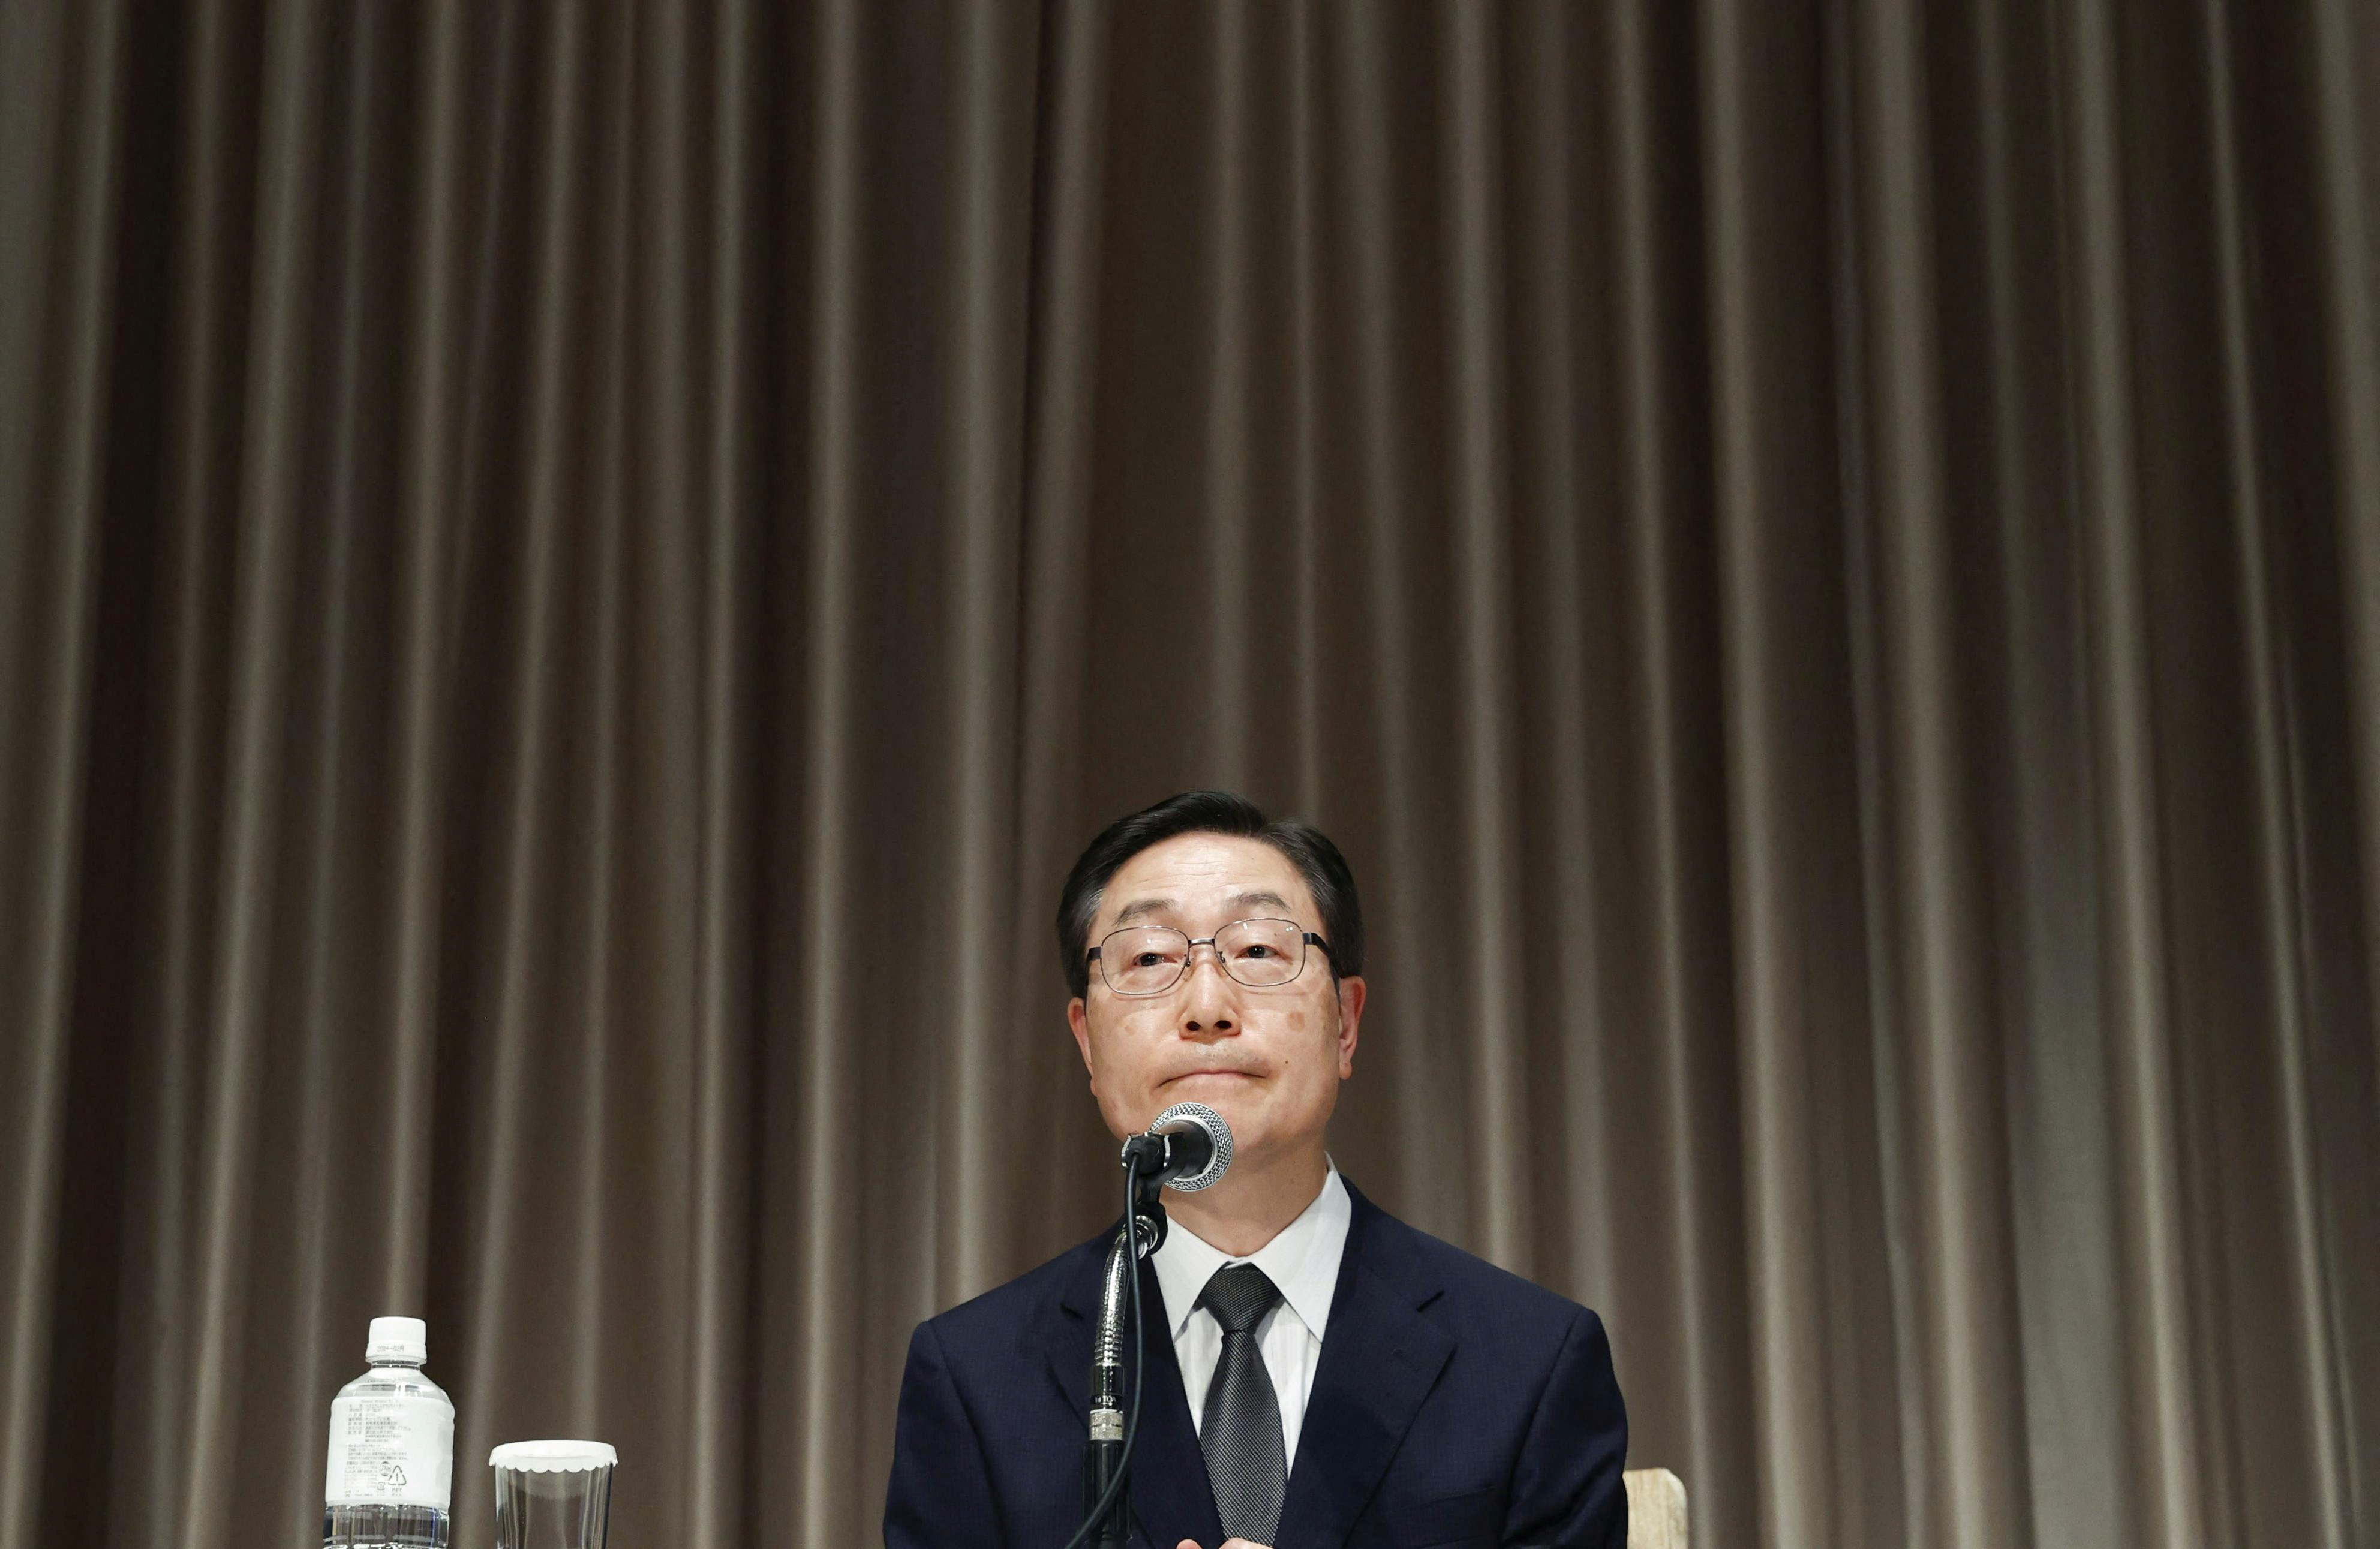 Tomihiro Tanaka, president of Unification Church attends a news conference in Tokyo